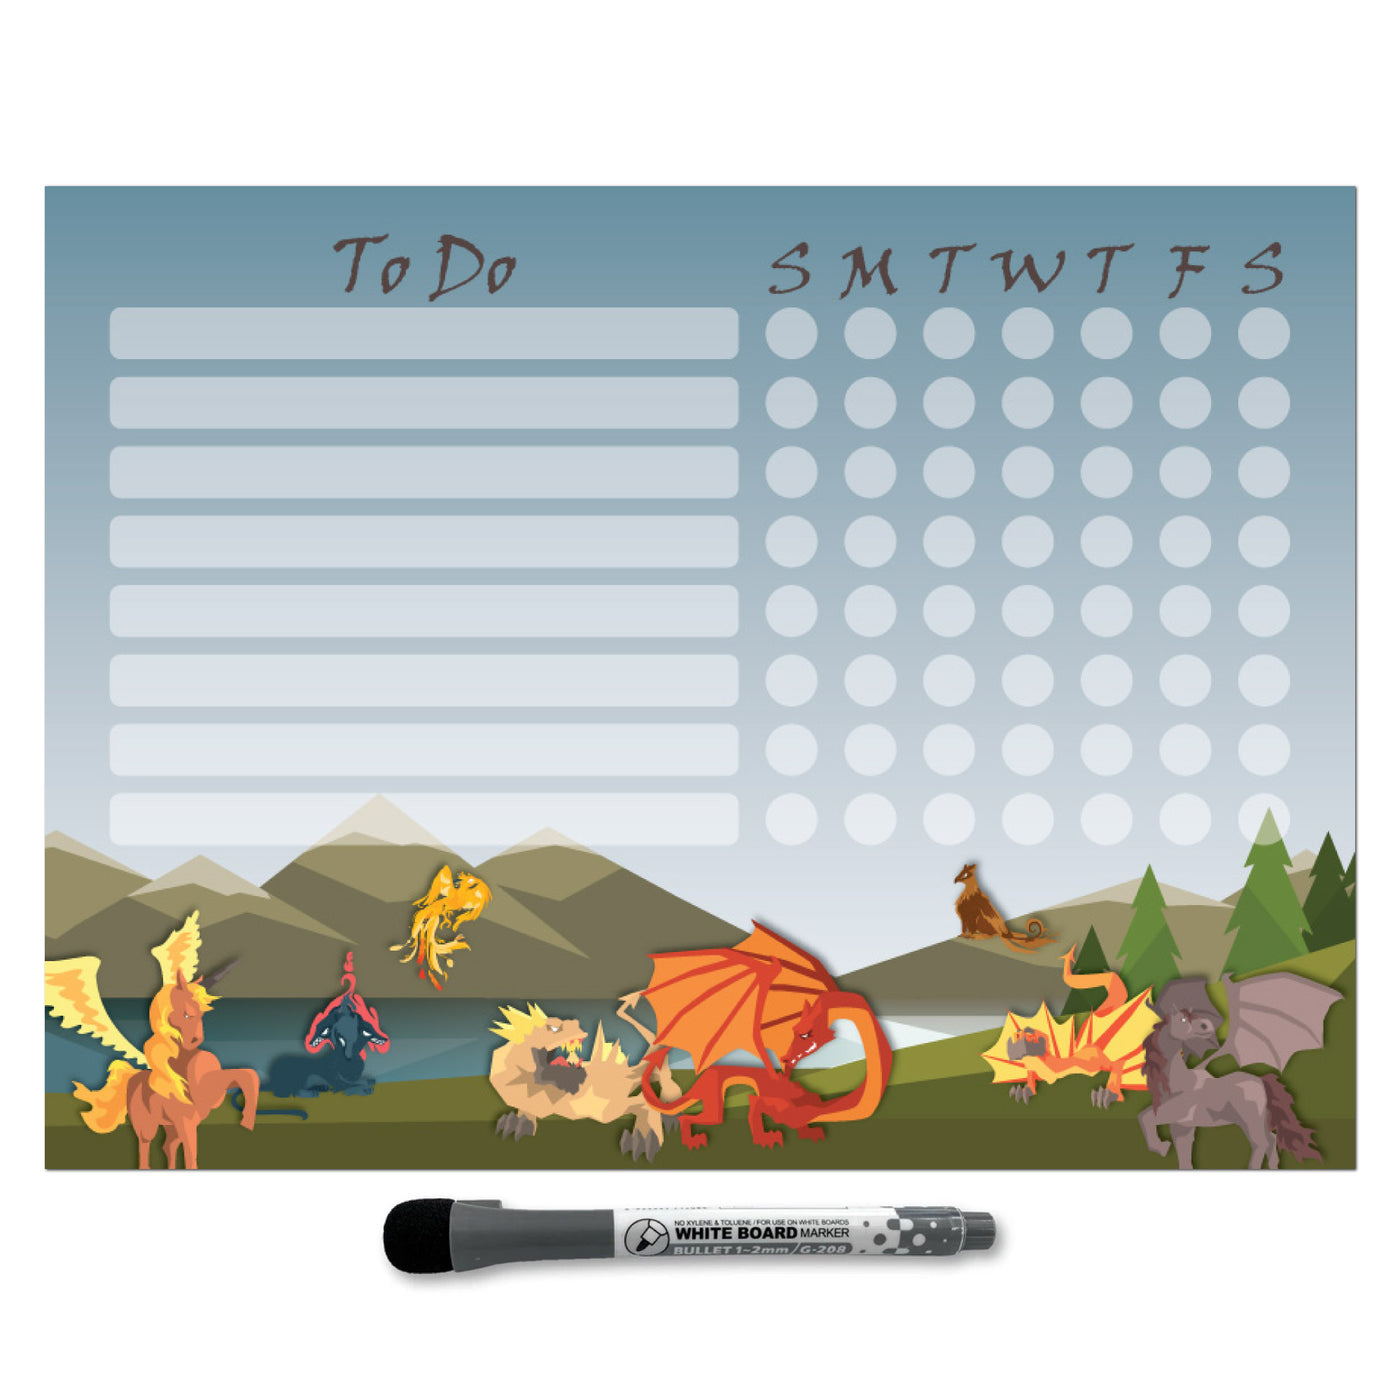 Mythical Creatures Kids Task Chart Sticker Doodles